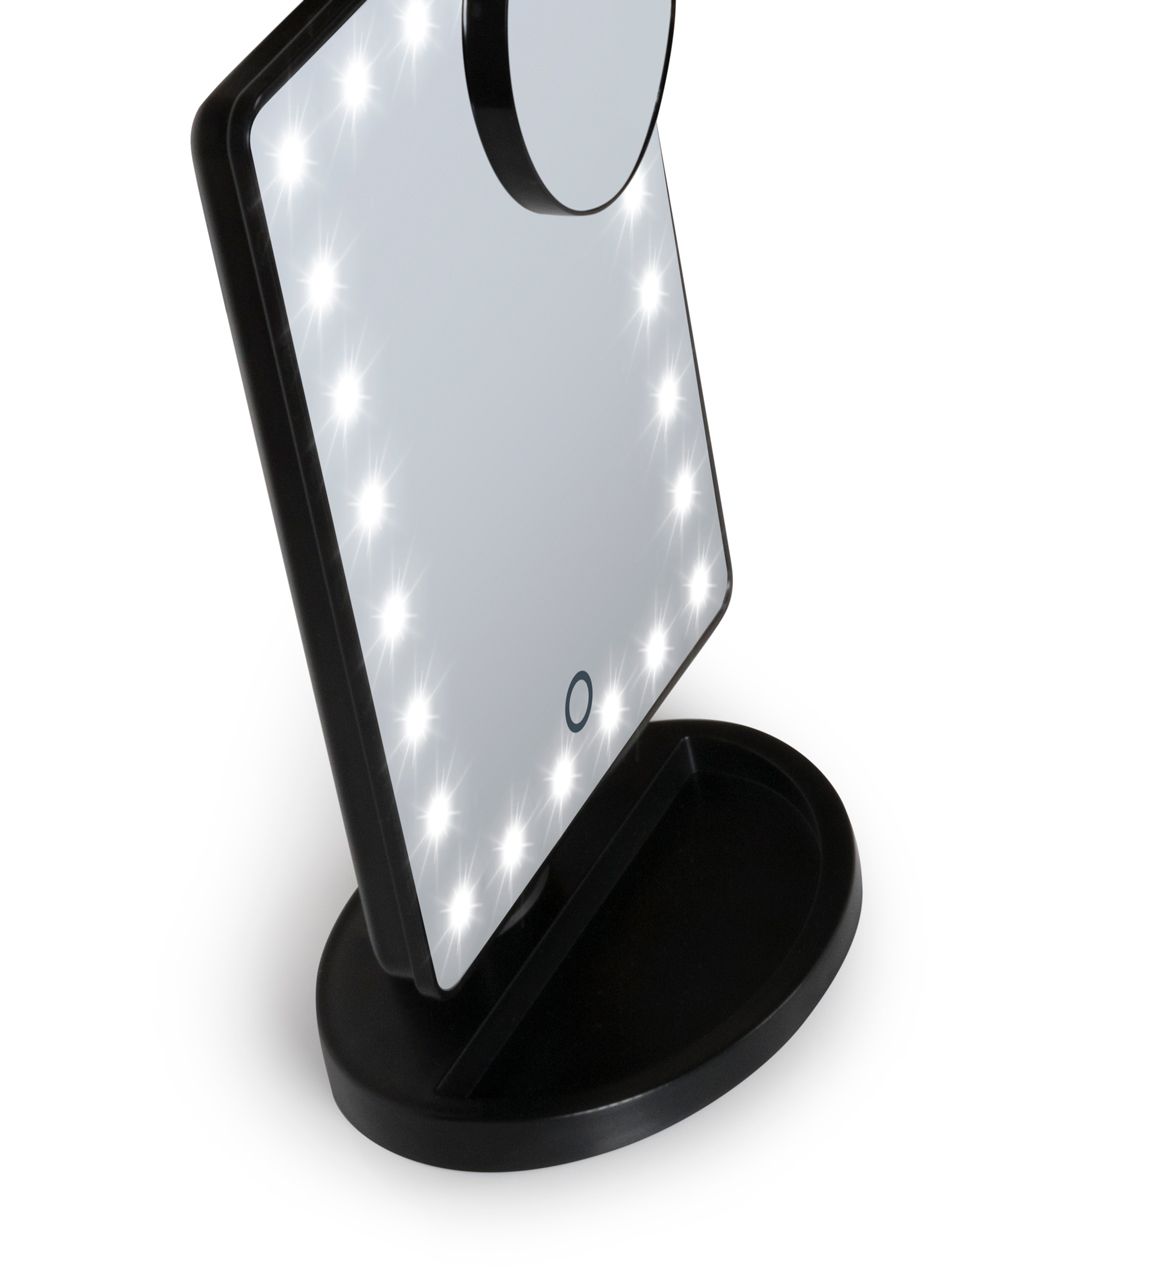 angled view of 24 LED touch dimmable make up mirror with LED light illuminated and compact 10x magnification mirror attached